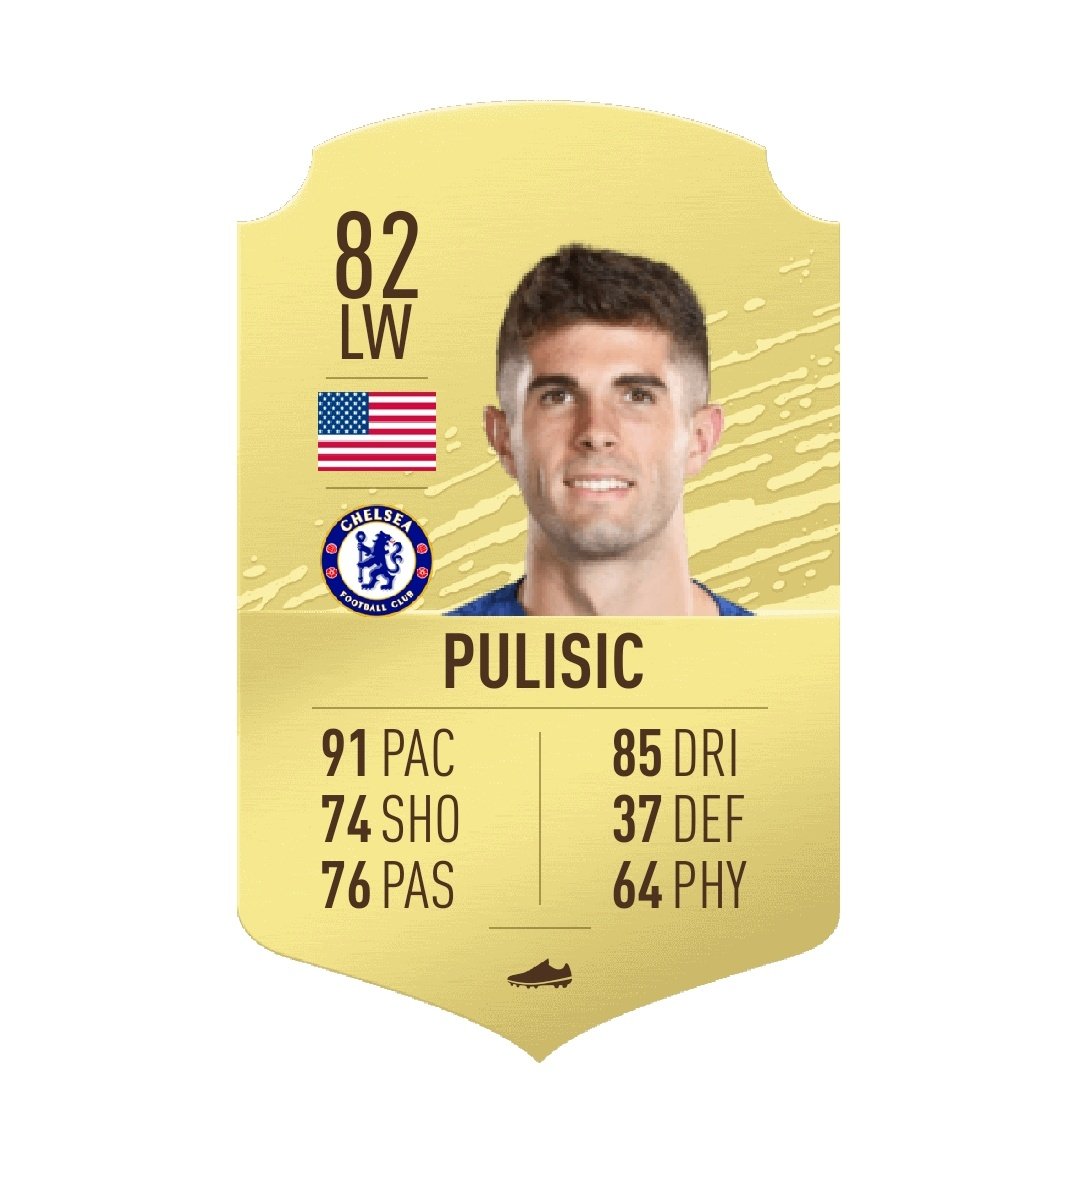 A big upgrade for Pulisic!Will he still be the main man on that side next season?